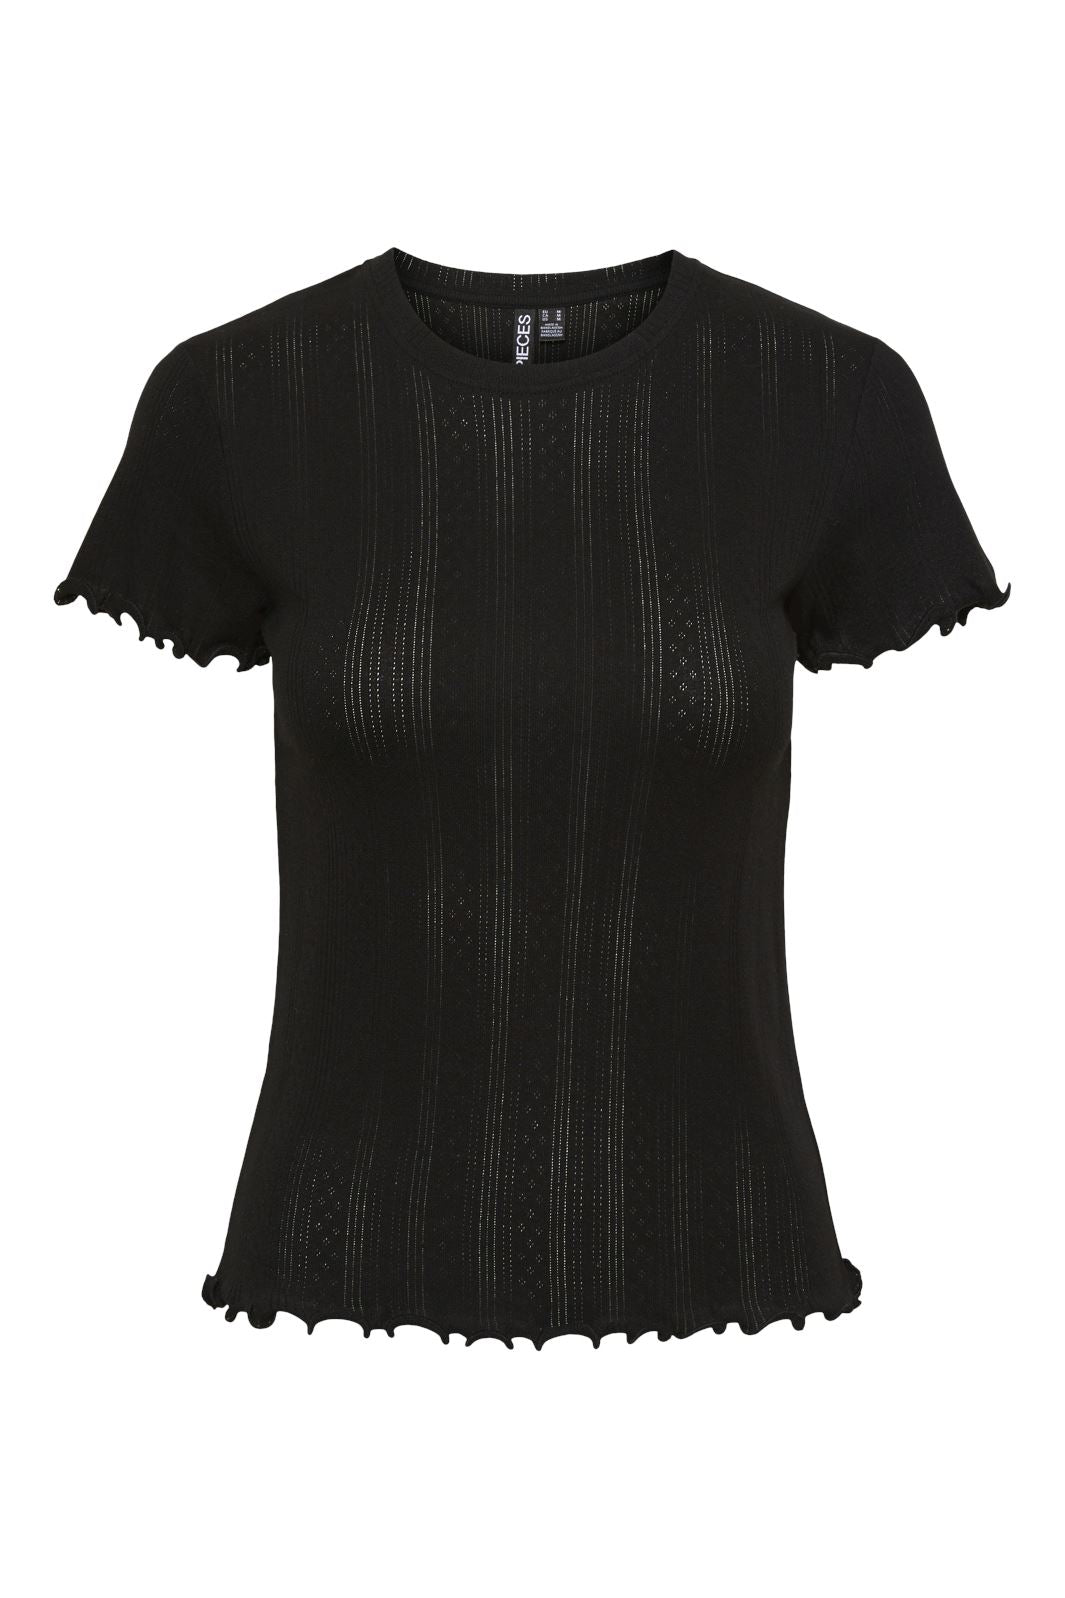 Pieces - Pcmarie Ss O-Neck Pointelle Top Pwp Mm - 4582076 Black